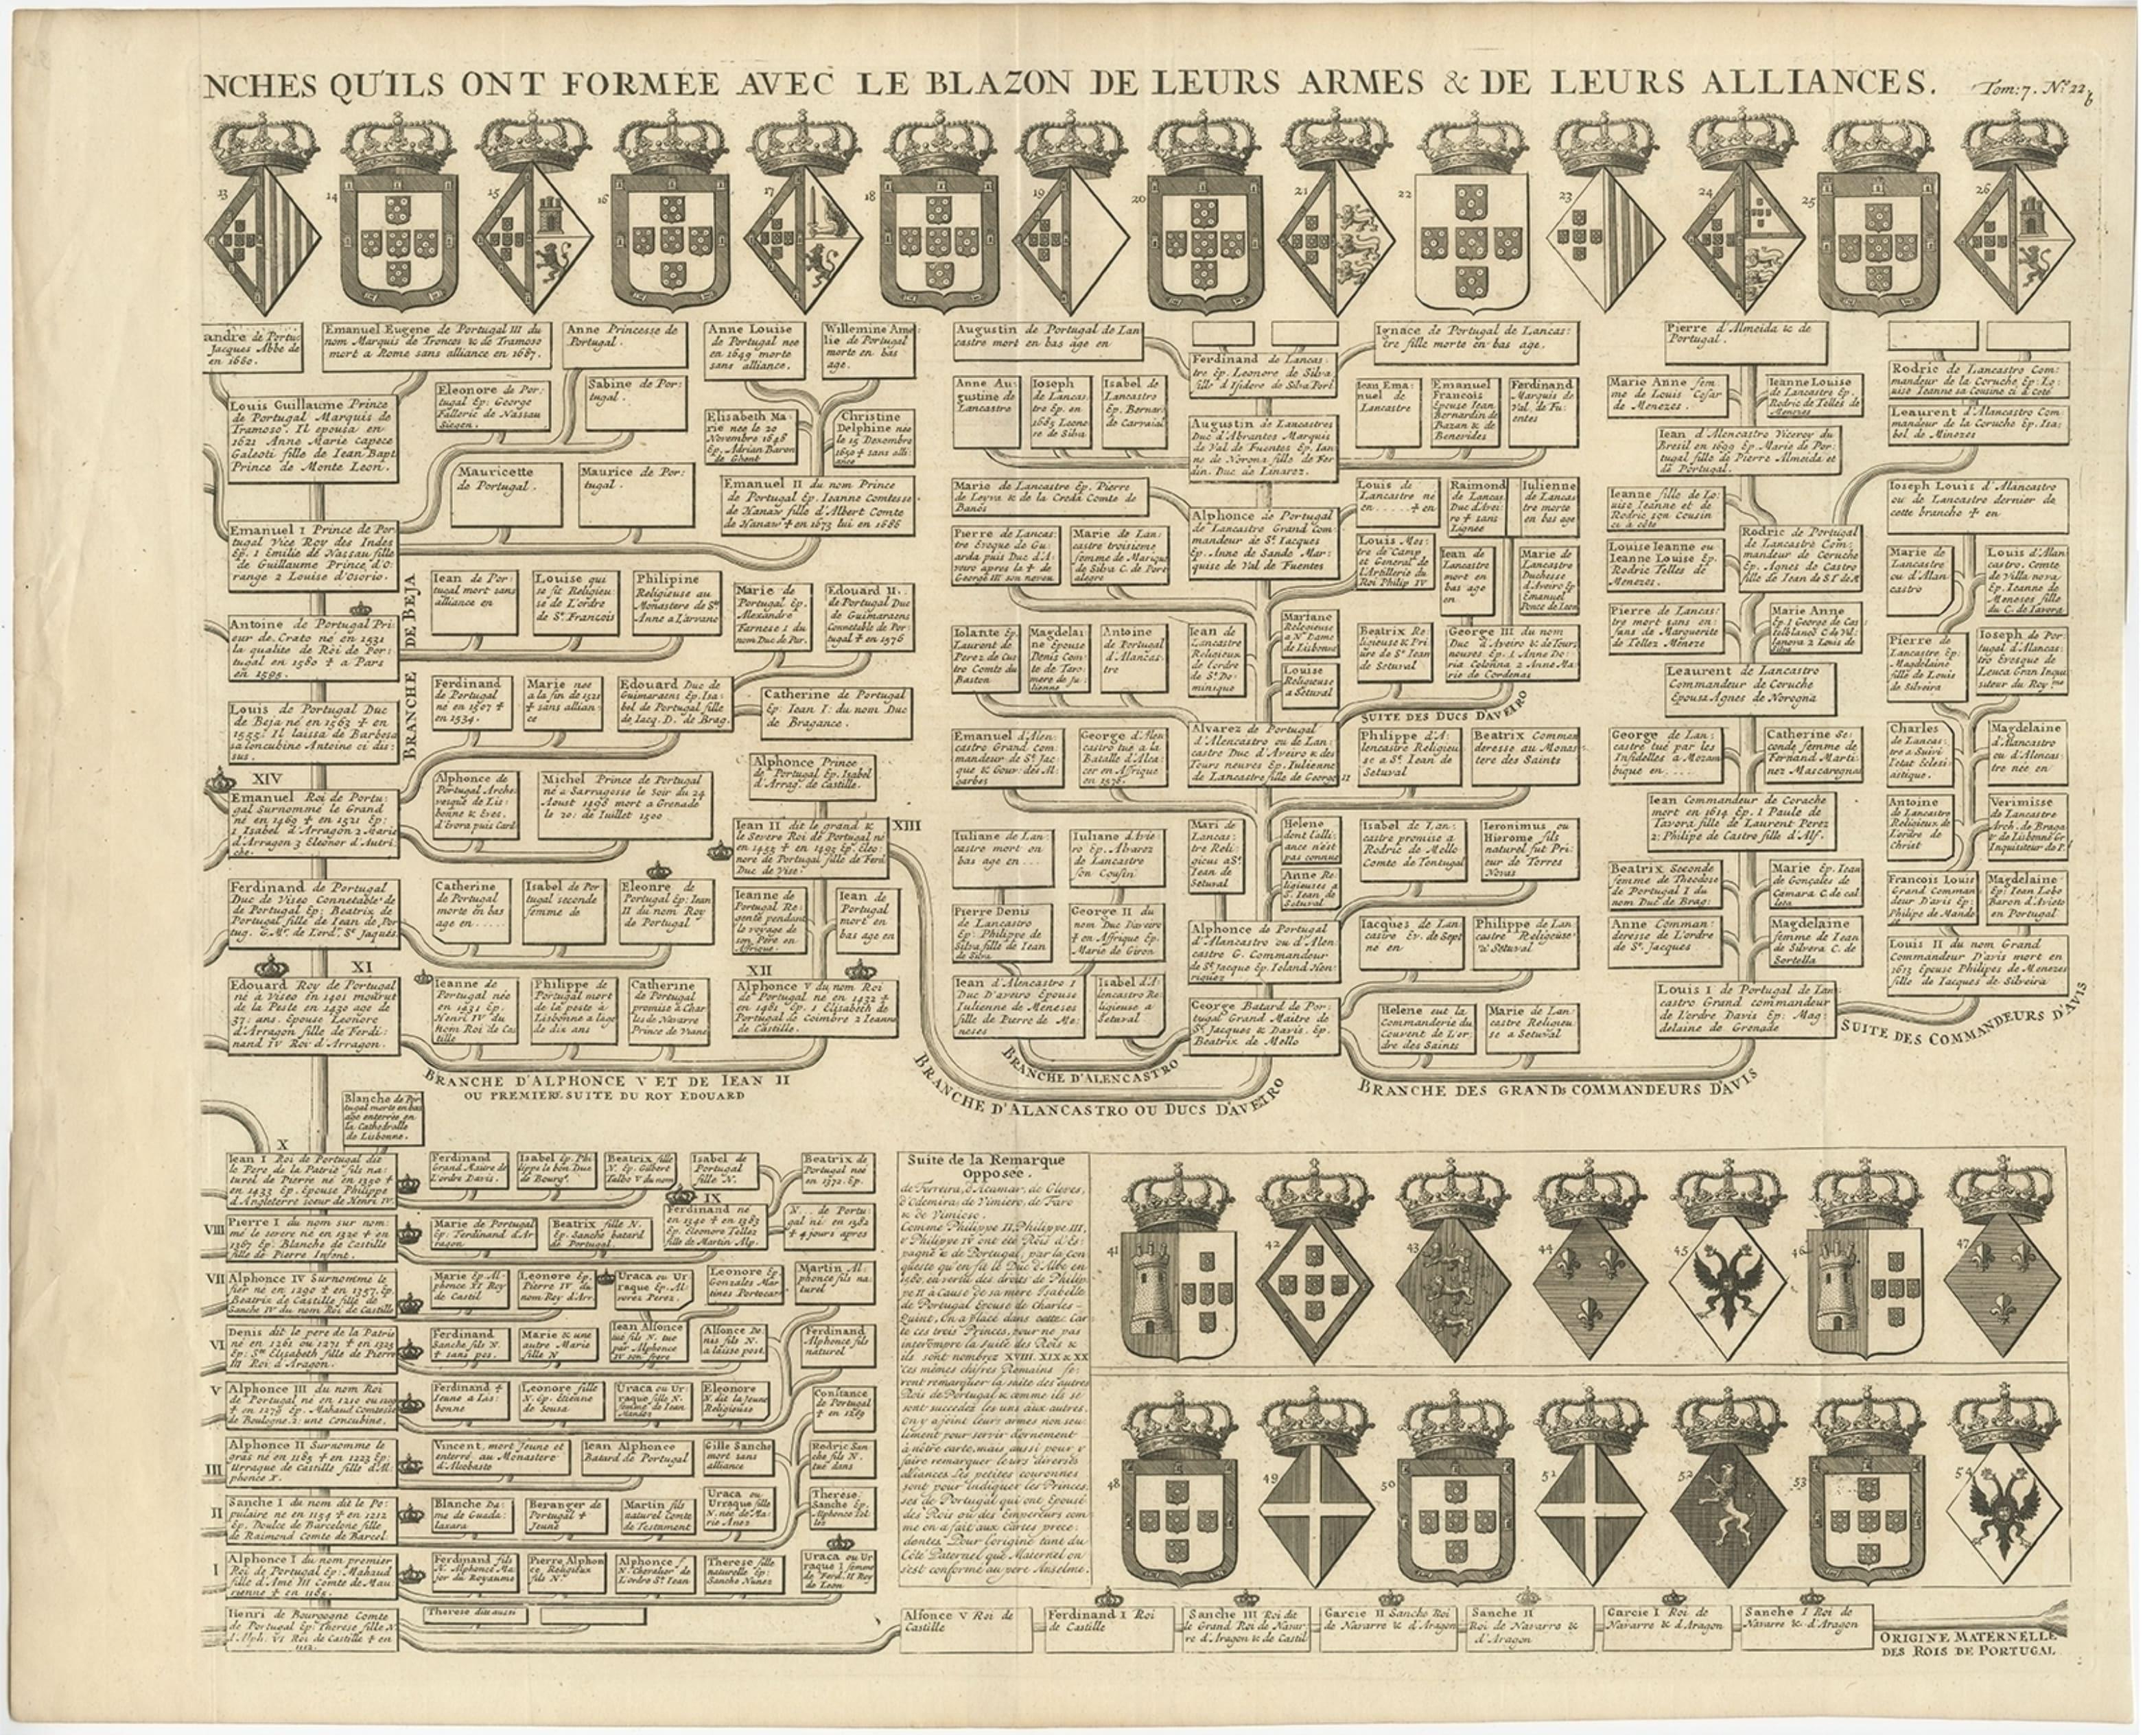 Antique print titled 'Carte Genealogique des Rois de Portugal (..)'. Set of two prints featuring the genealogy of the Kings of Portugal and the different branches, each with the corresponding coat of arms. This print orginates from 'Atlas